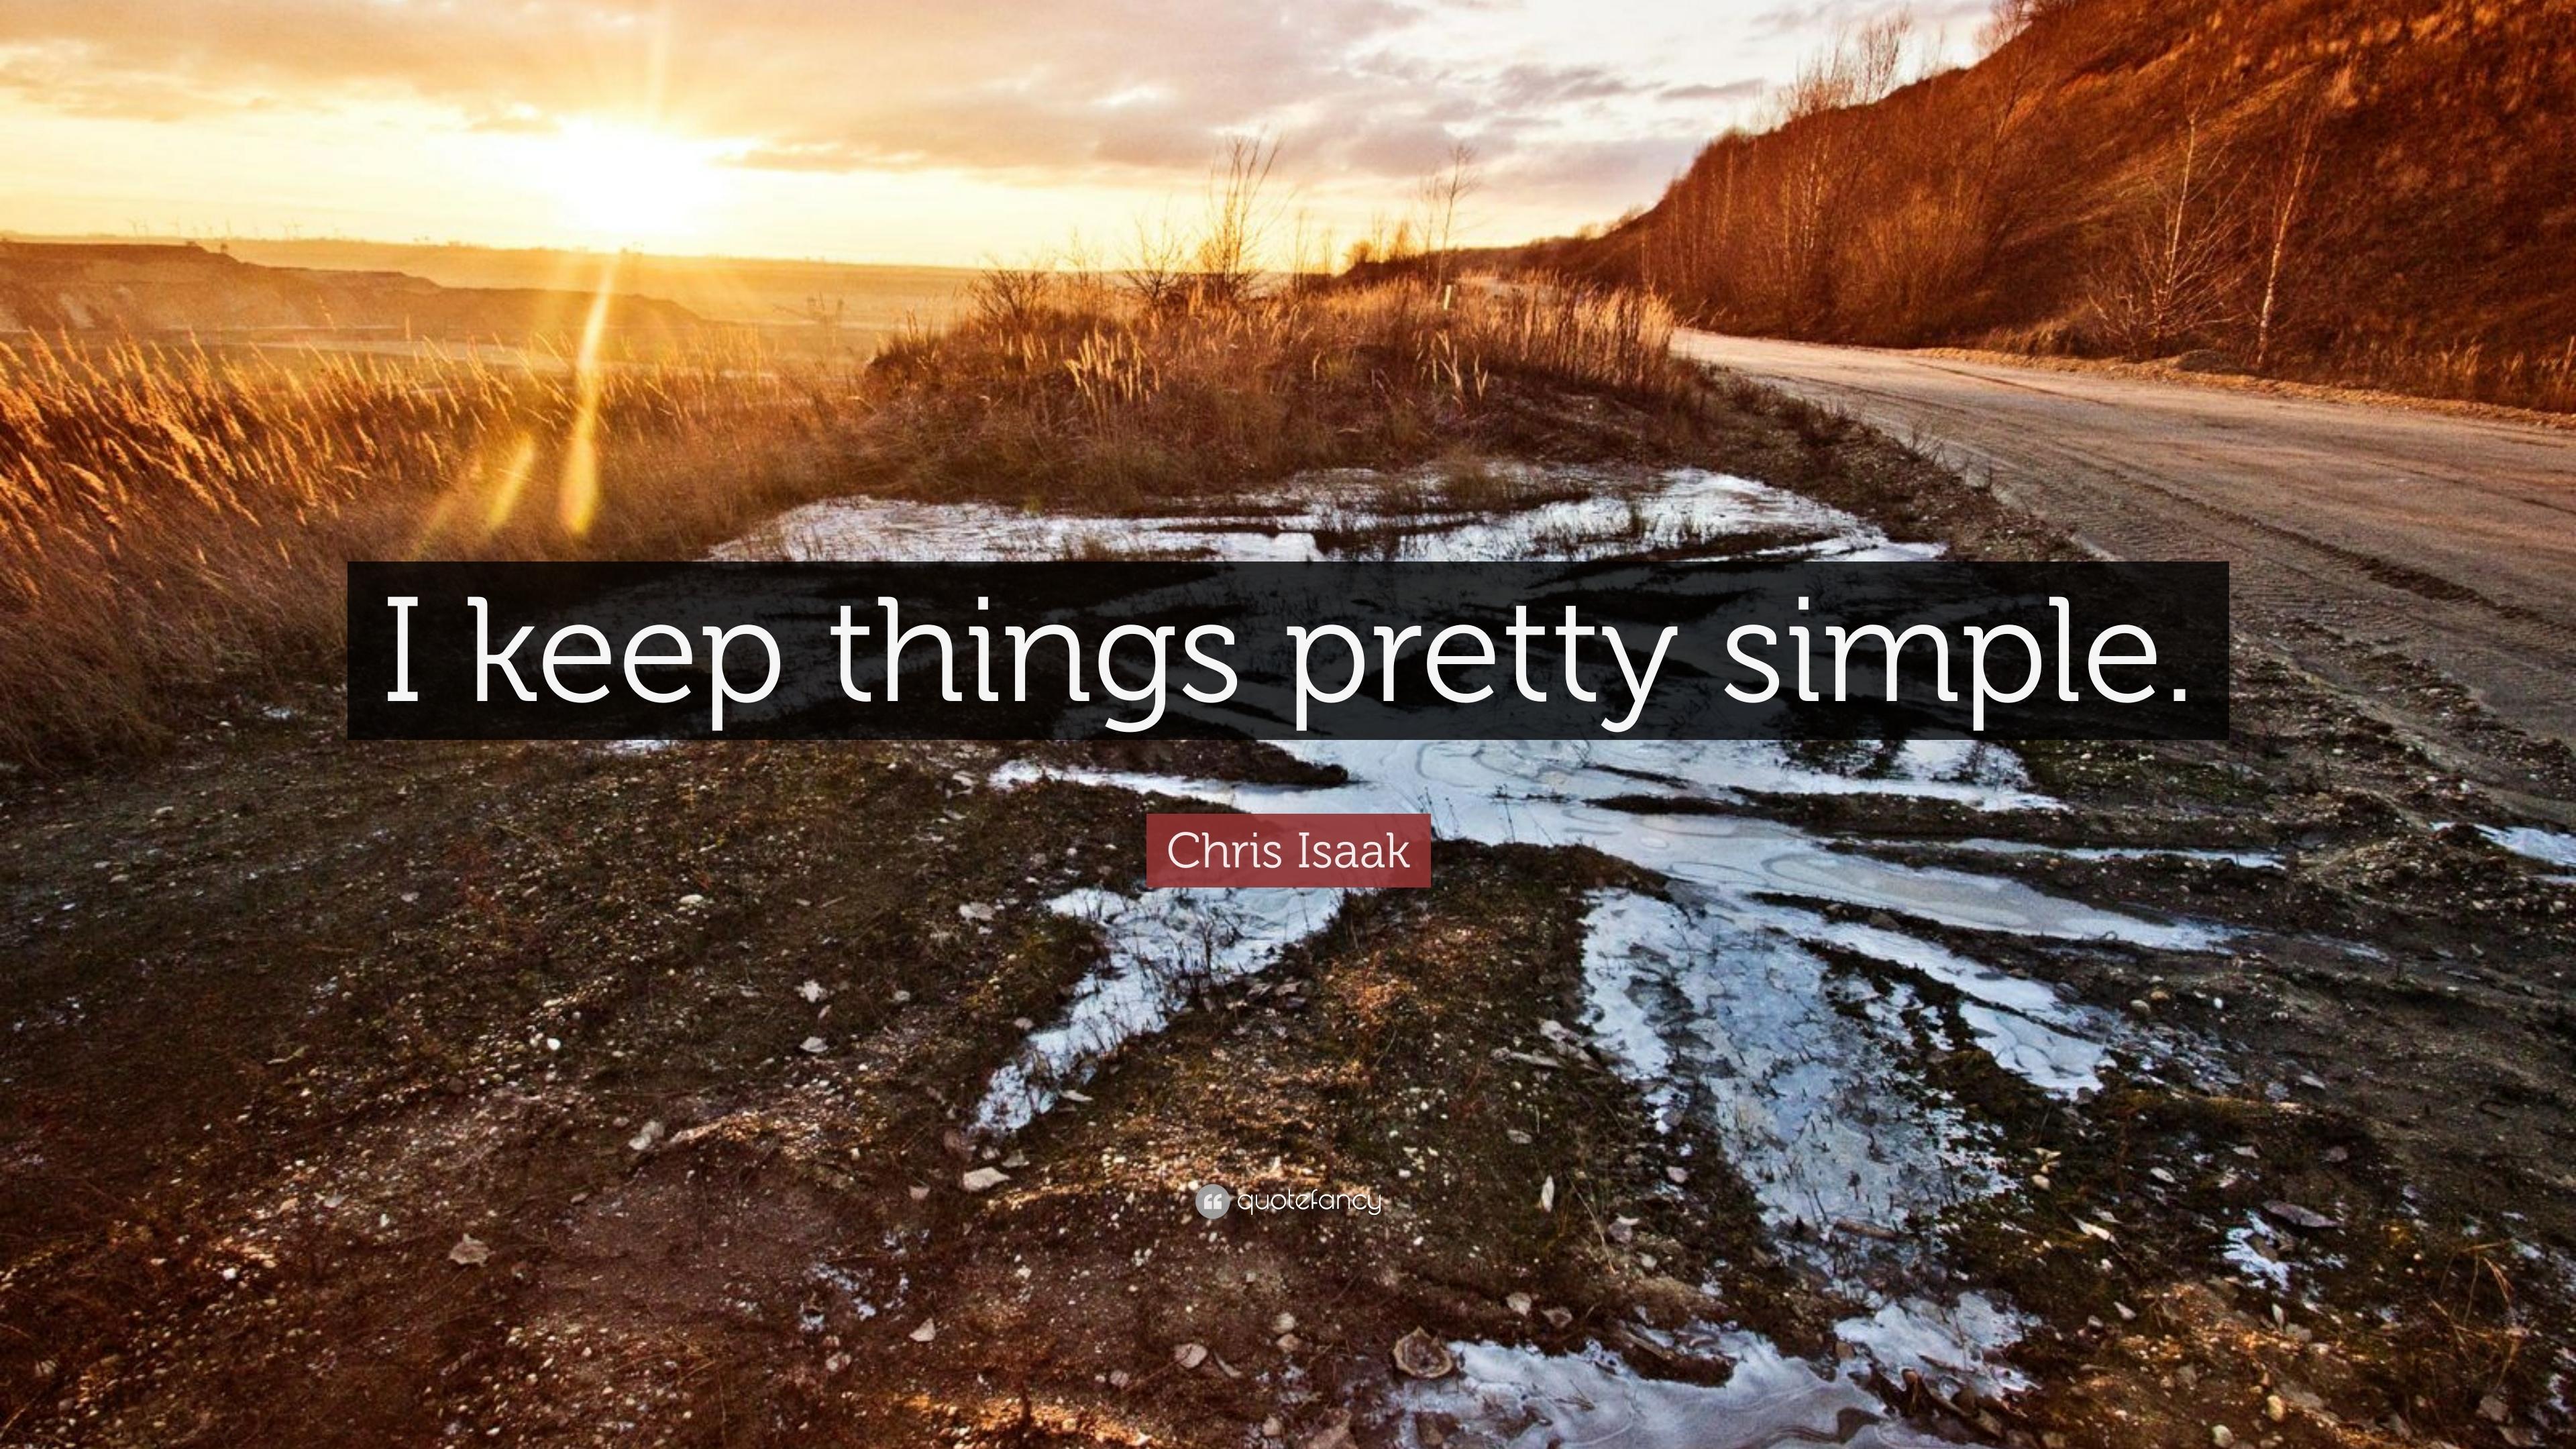 Chris Isaak Quote: “I keep things pretty simple.” 7 wallpaper